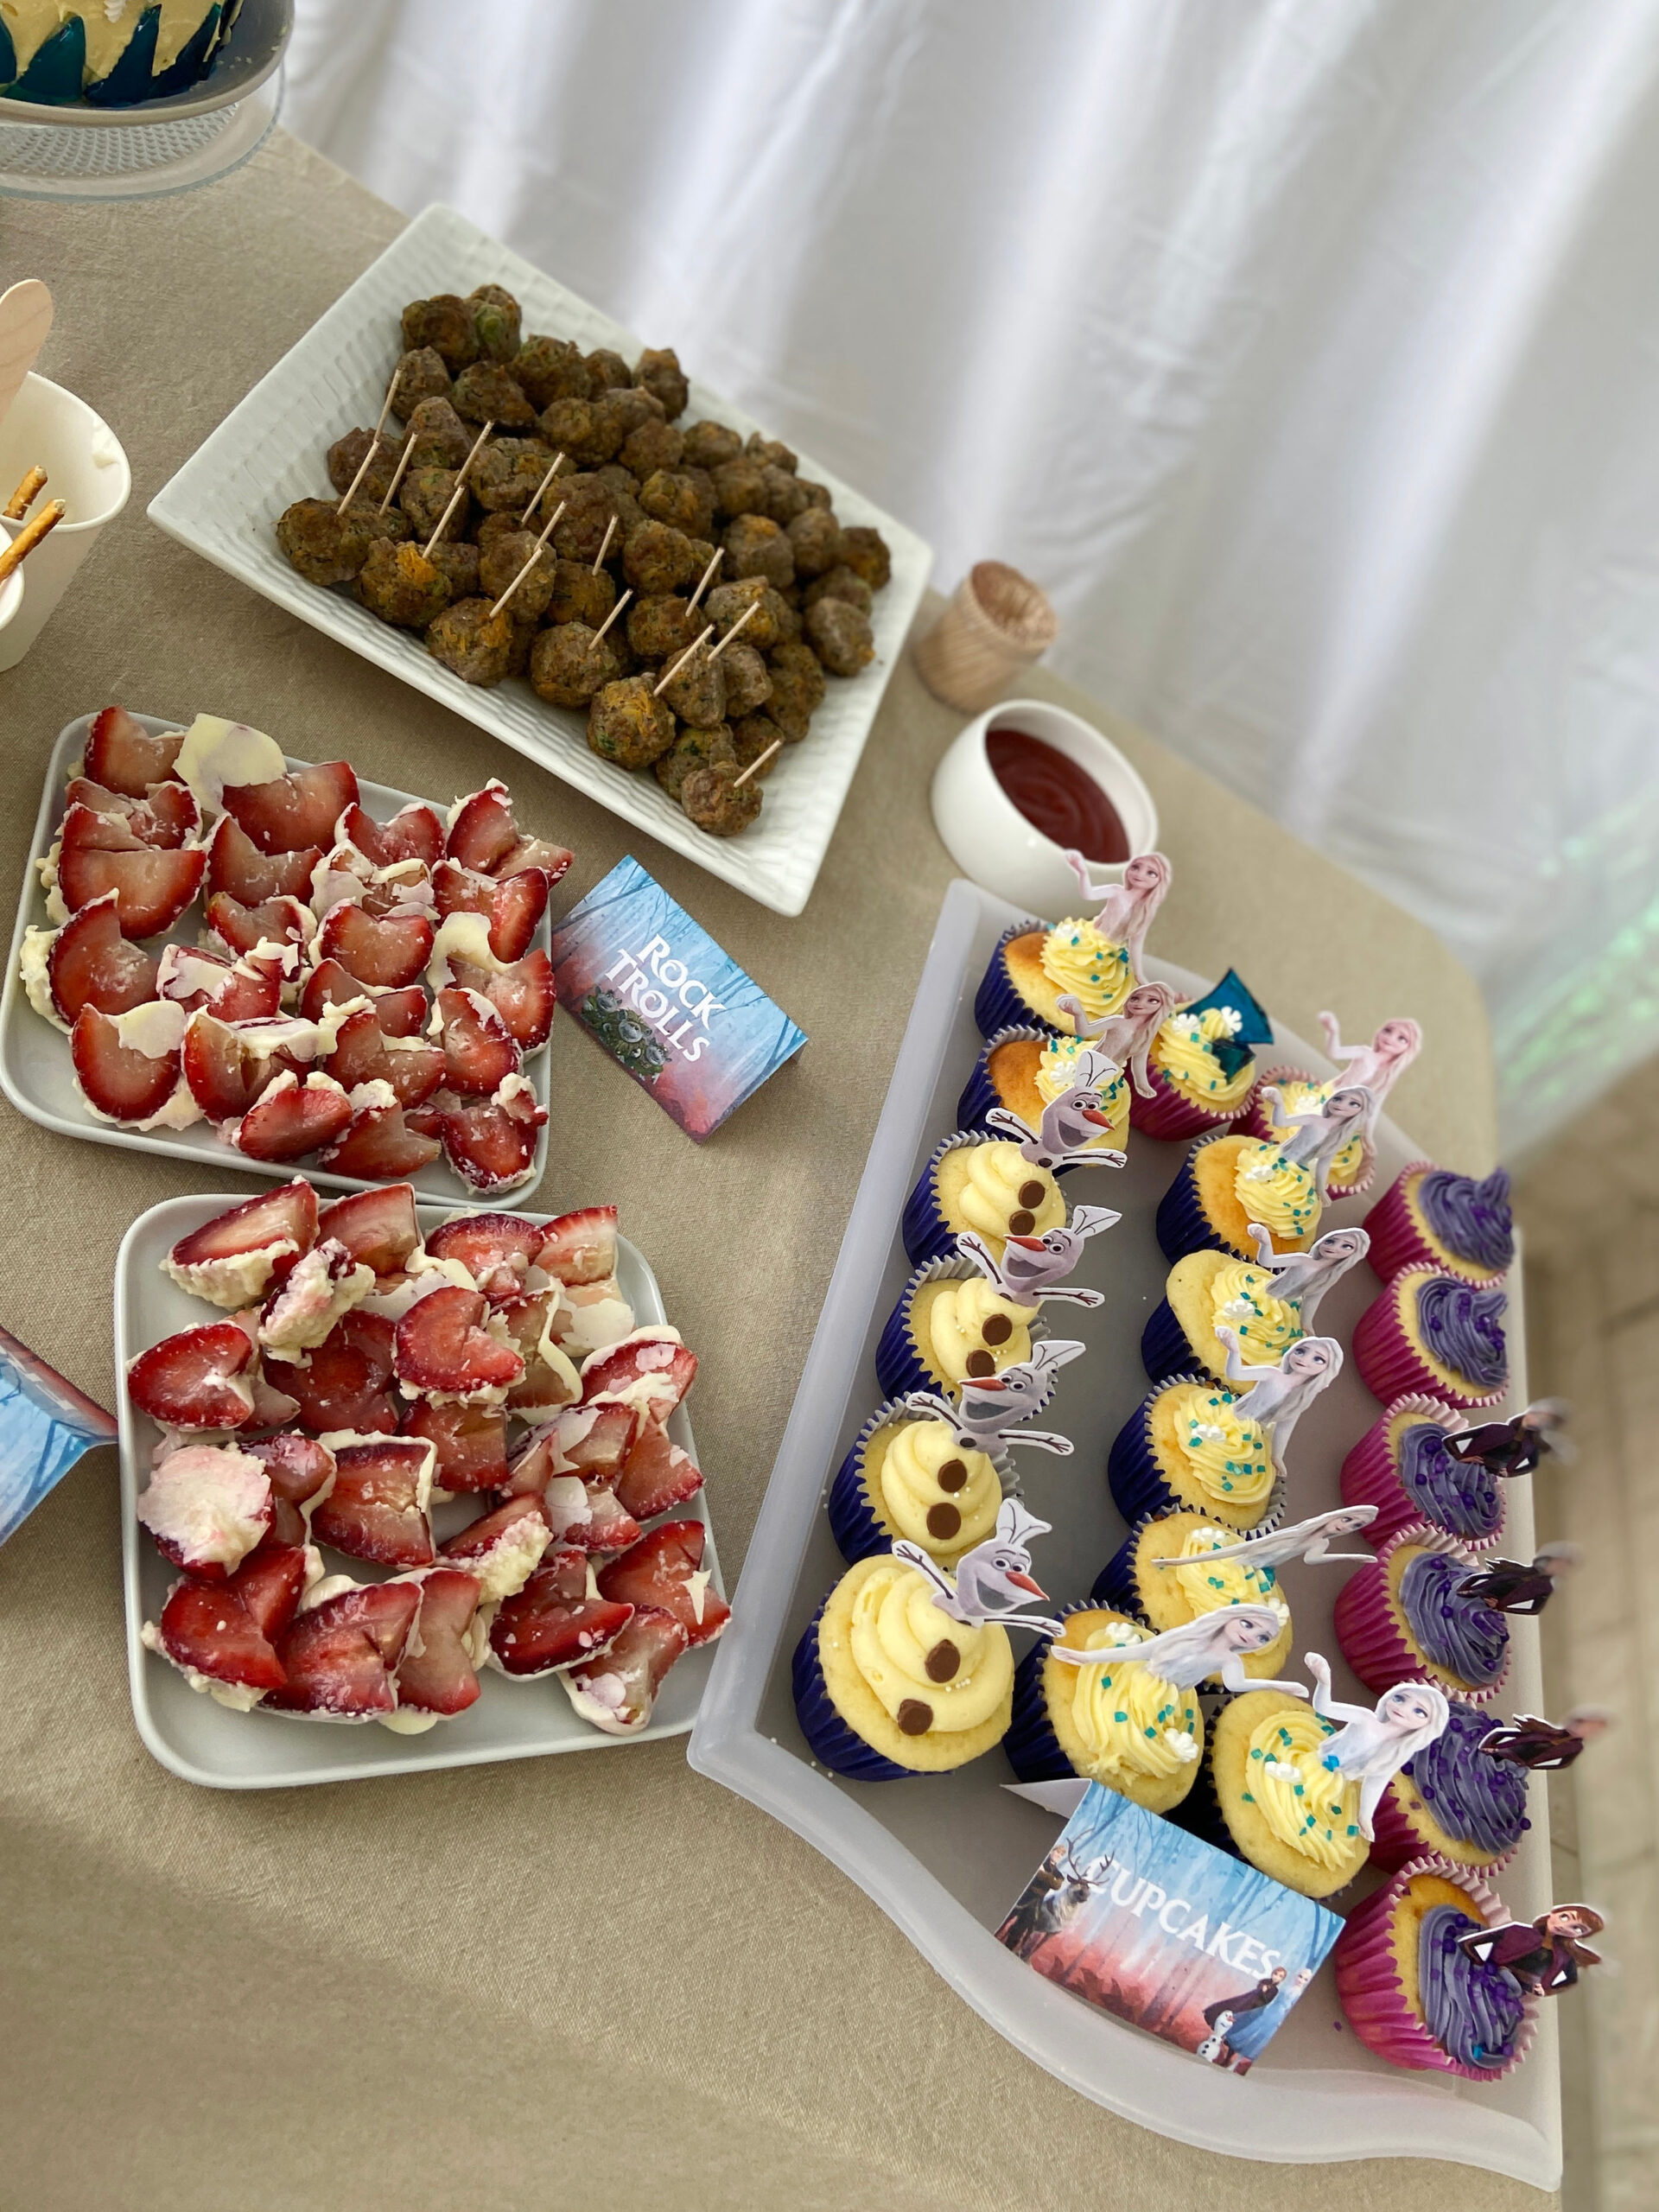 Frozen Themed Birthday Party Food Spread 02